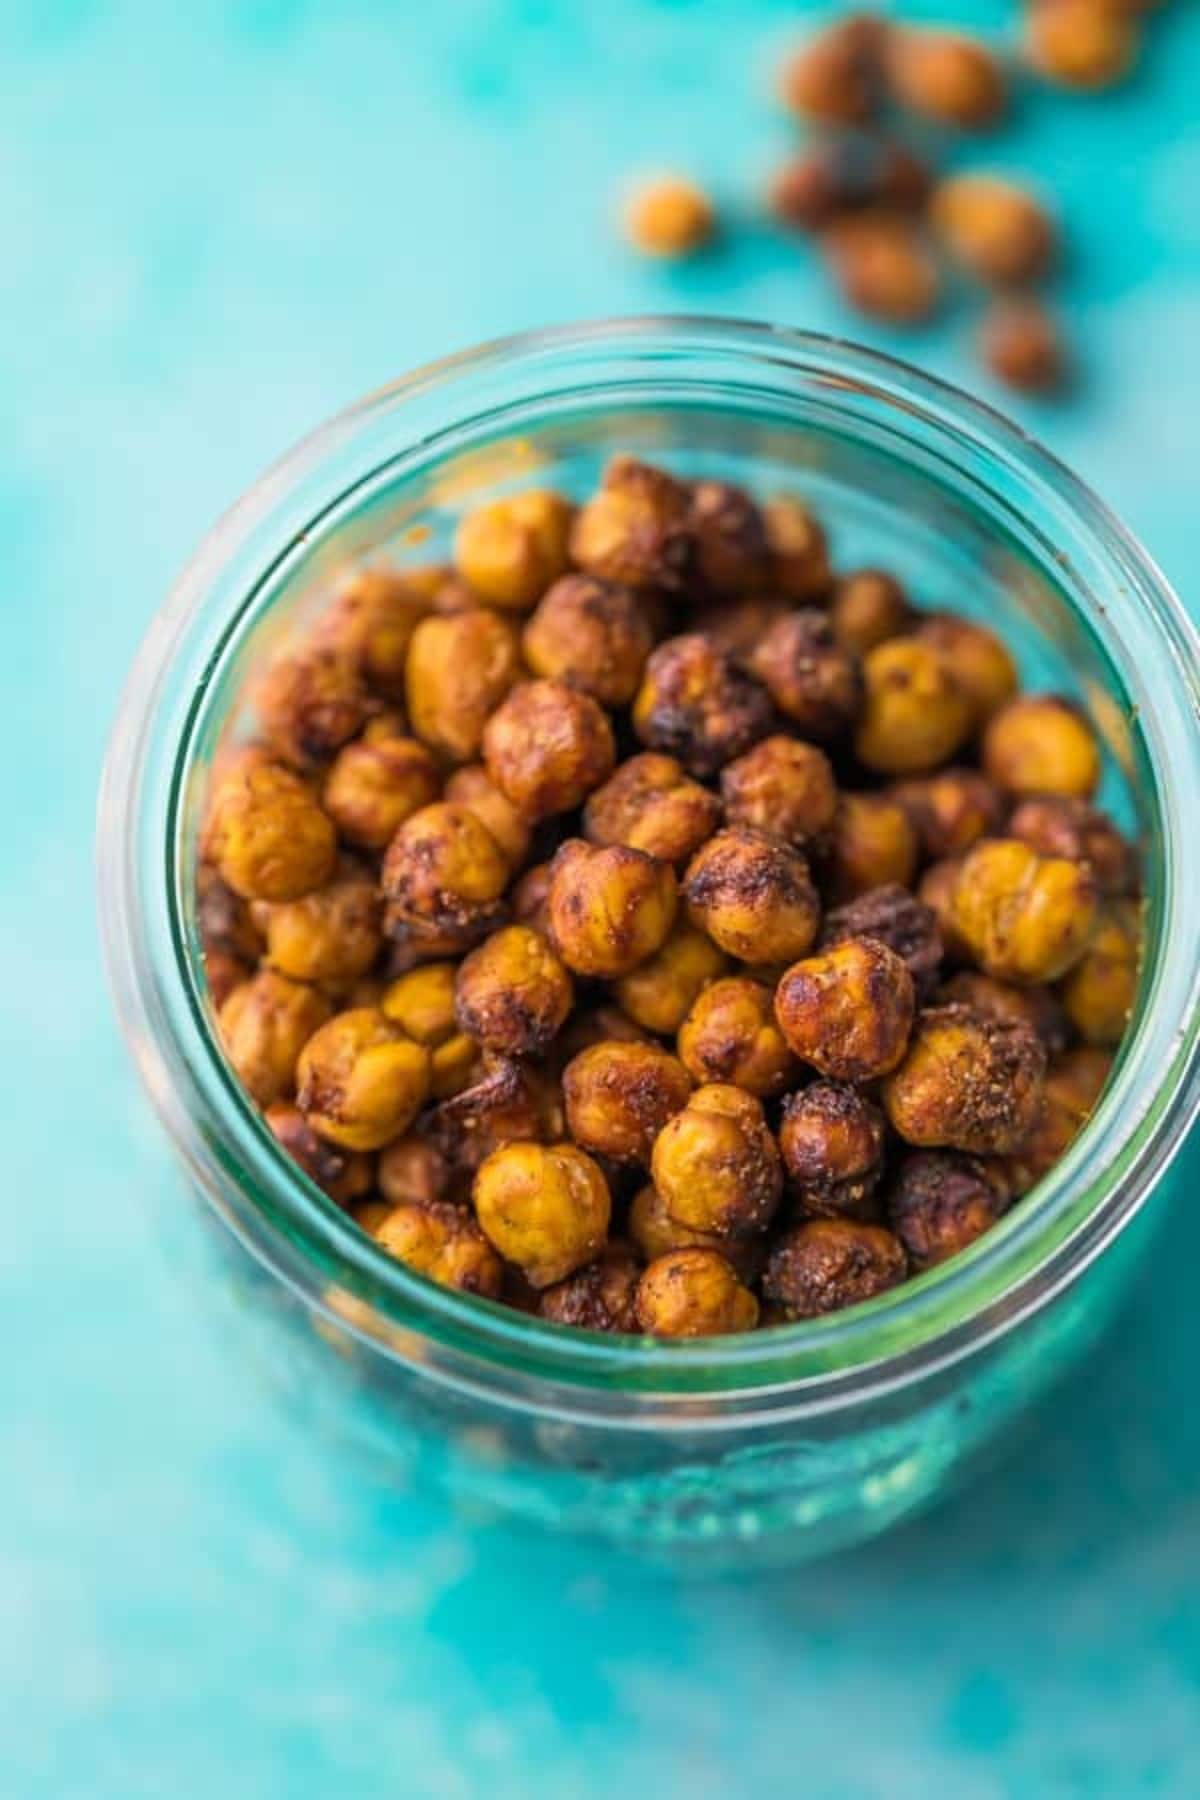 a glass jar full of roasted chickpeas on a blue background